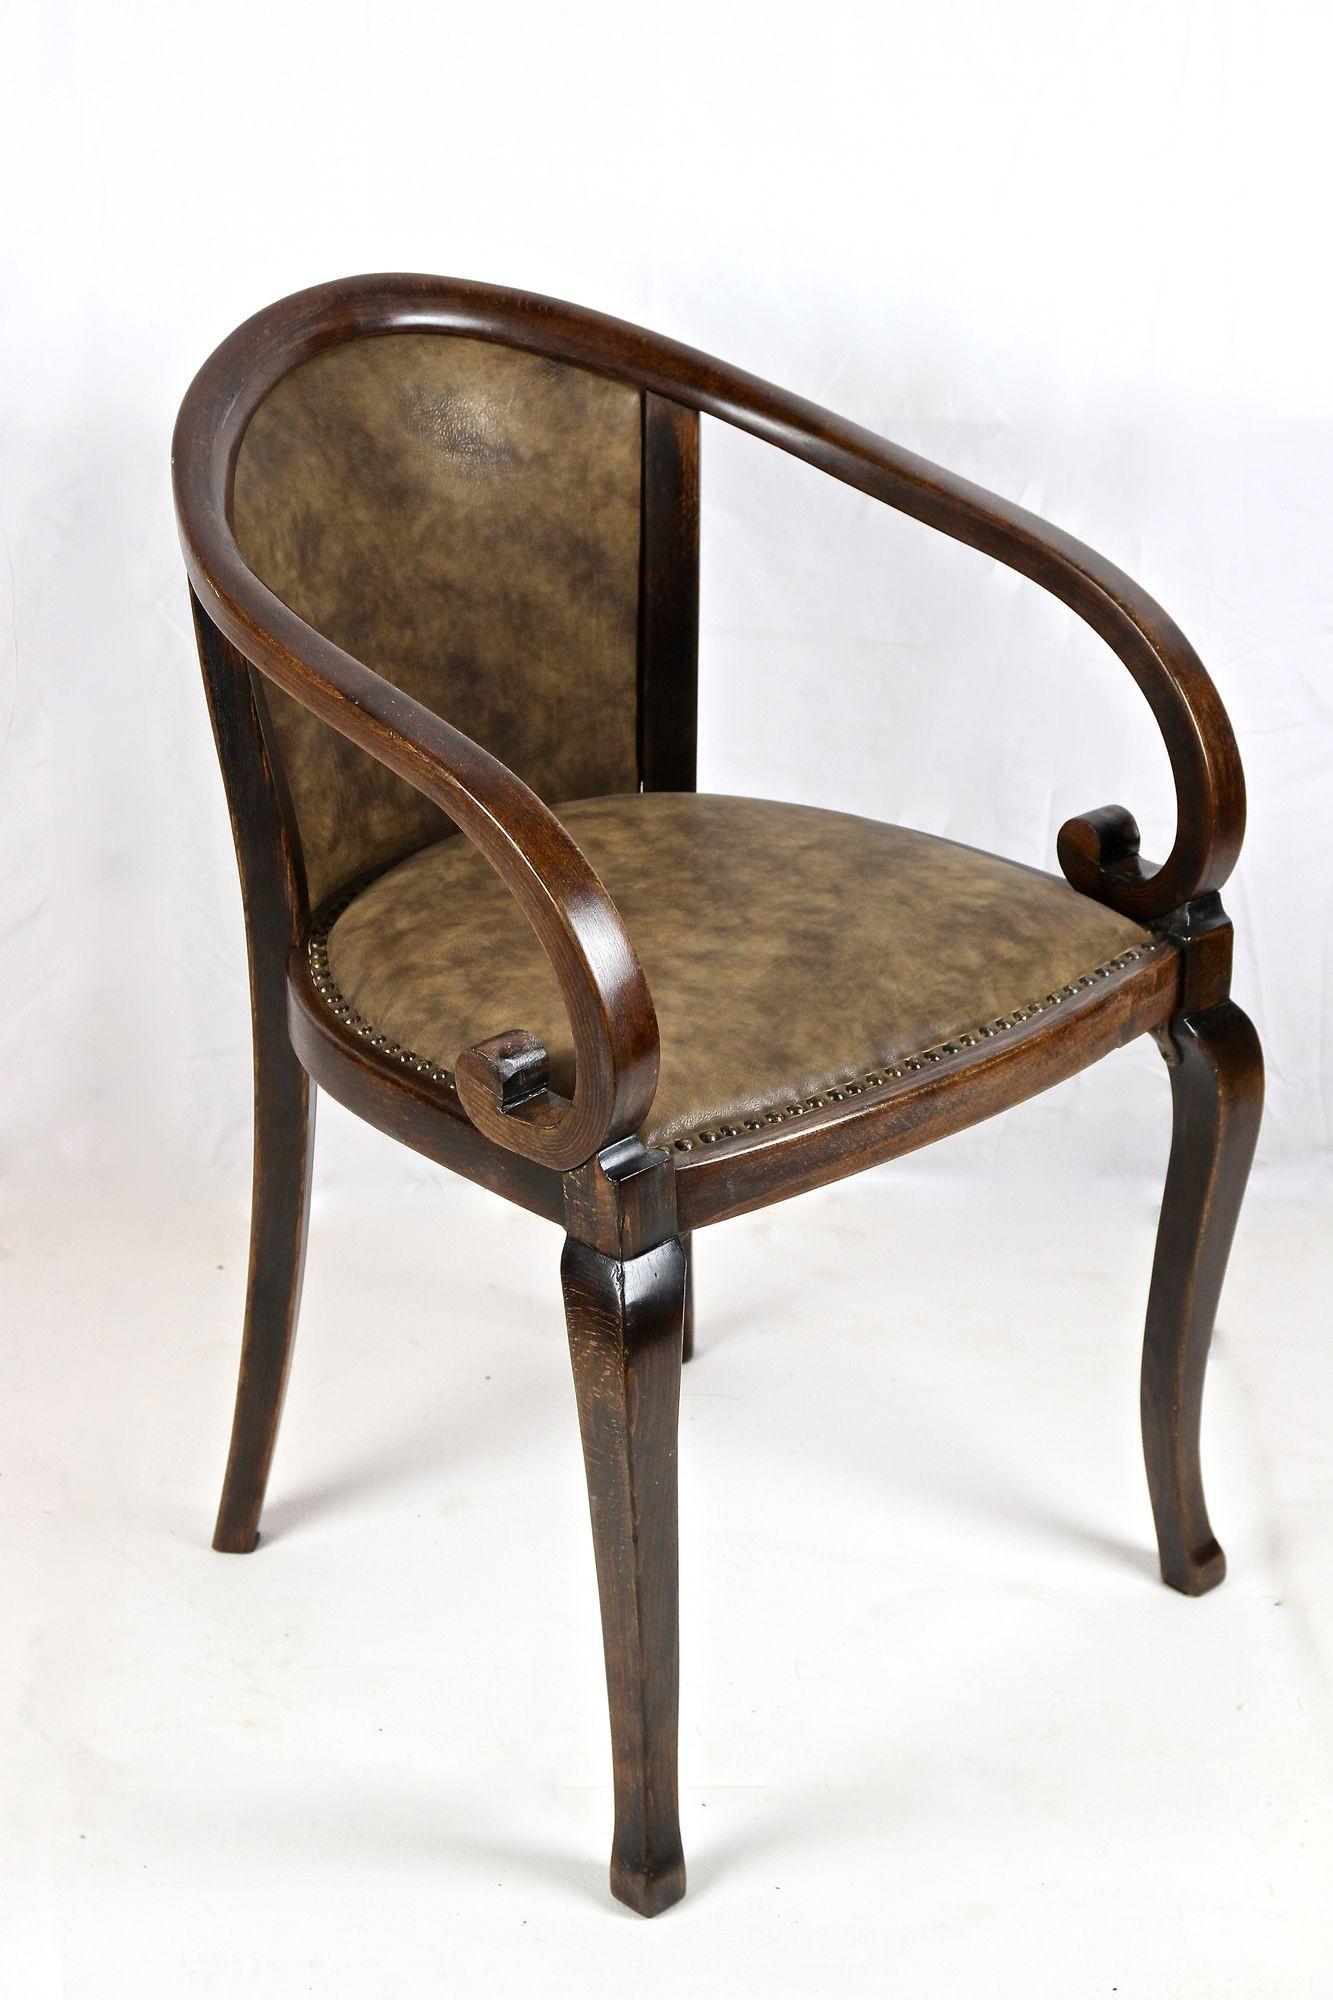 Unusual bentwood armchair produced by the famous company of Thonet at the end of the 19th century around 1895 in Vienna. This rare Austrian Art Nouveau armchair impresses with absoutely beautiful designed lines. The incredible looking armrests with